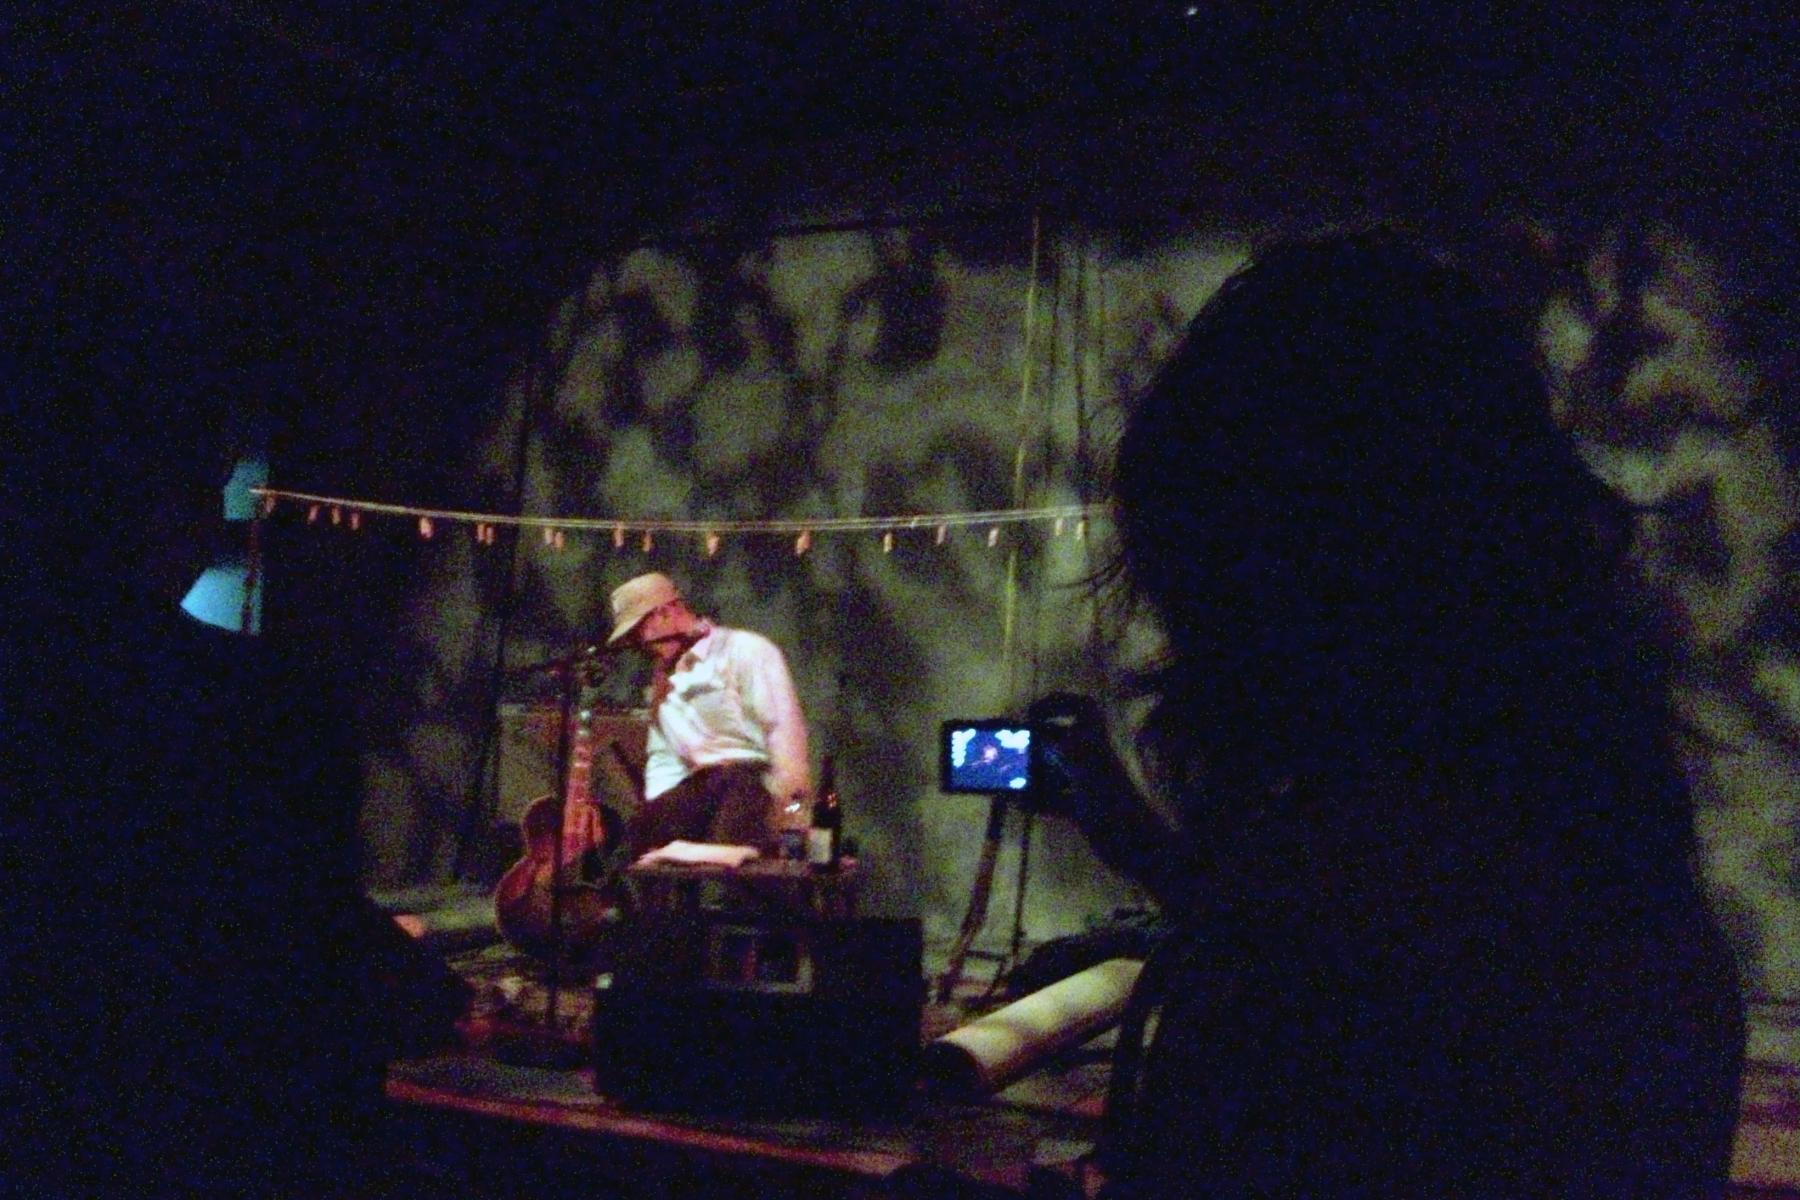 Kurt Wagner, 27 September 2008, playing the opening for The Marfa Sessions.